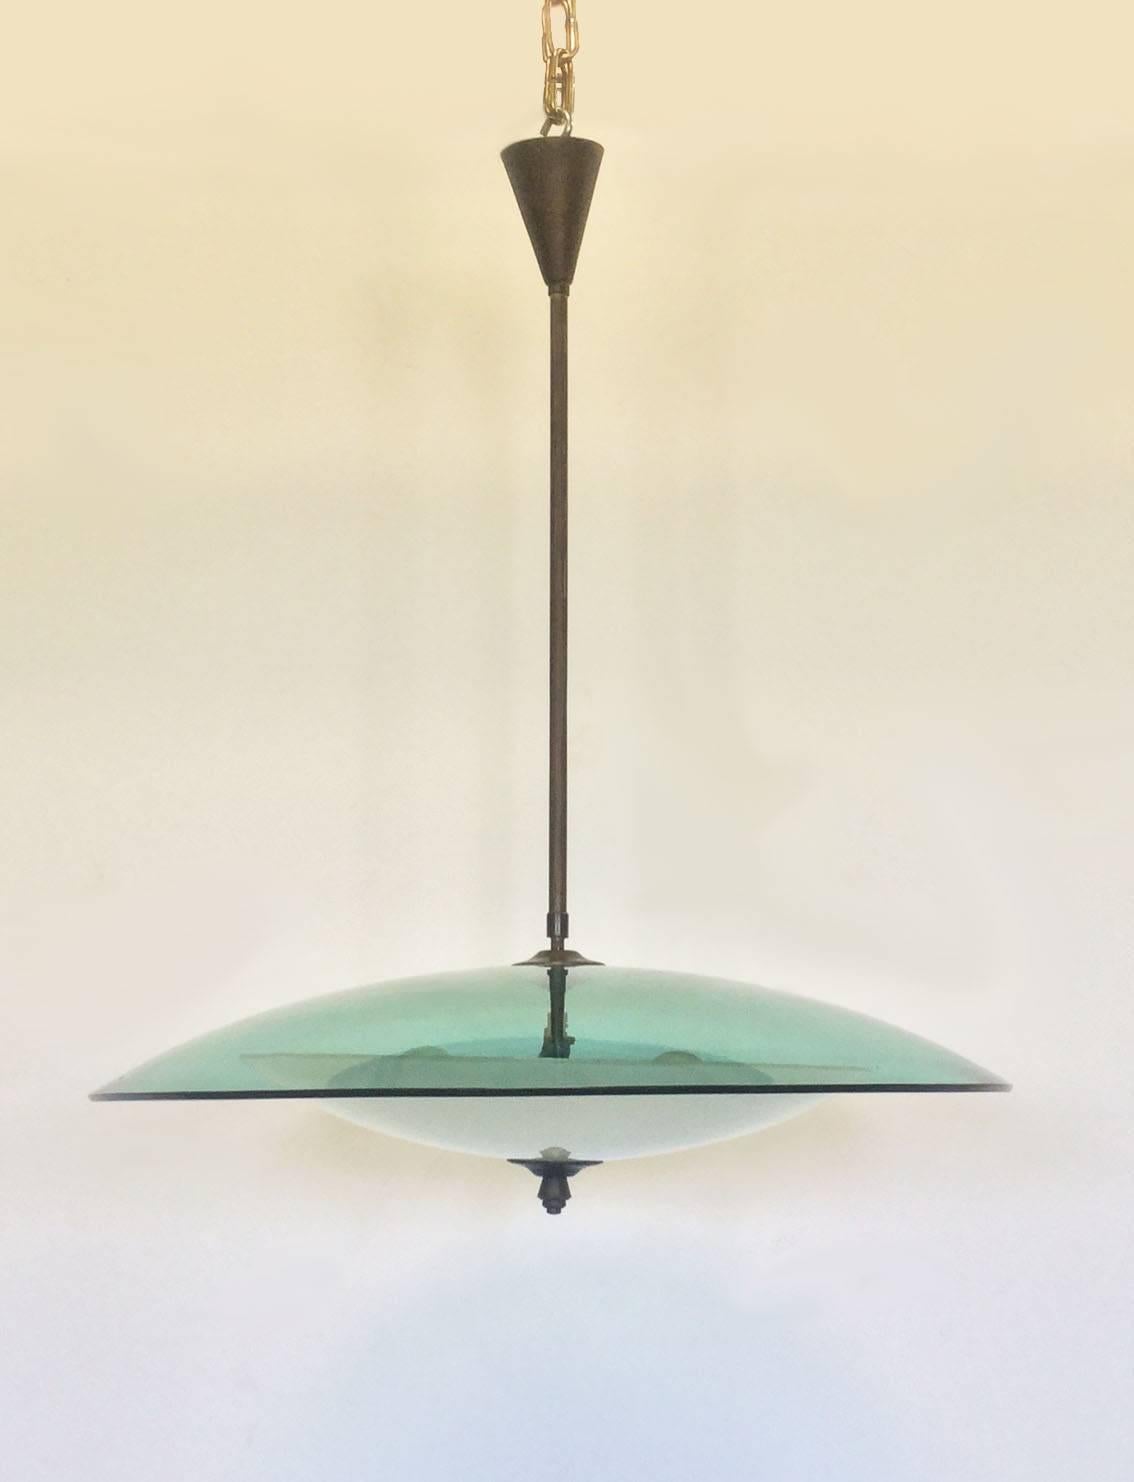 Elegant chandelier with white opaline cup as diffuser surmounted by a large green glass curved cup, brass stem that ends with brass screw pyramid.
Functioning wire system, 
Fontana Arte. 1950.